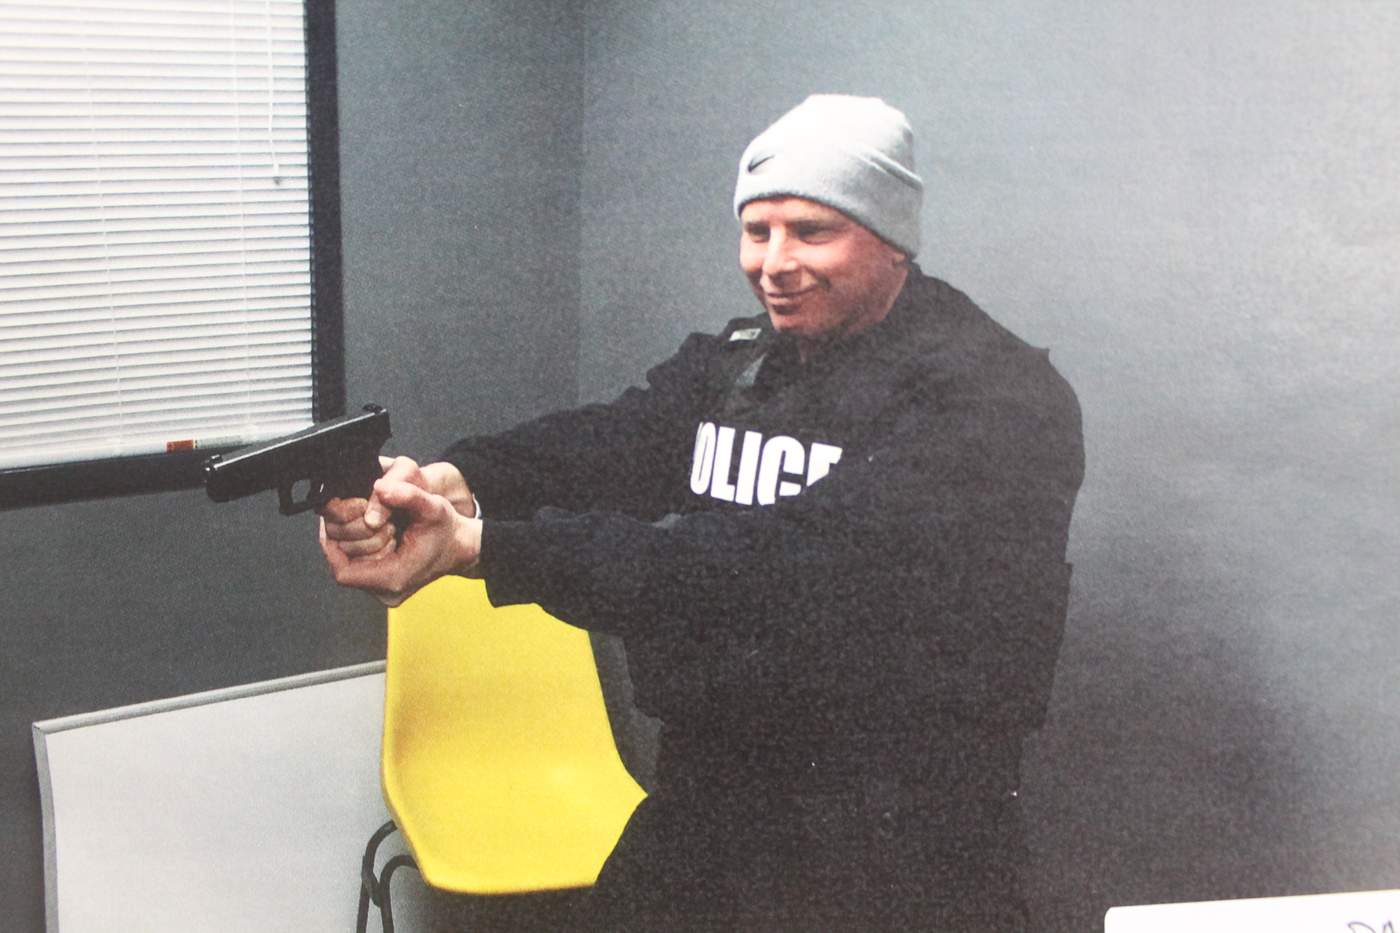 Stepp wears Jenkins' vest and holds his gun at BPD headquarters.